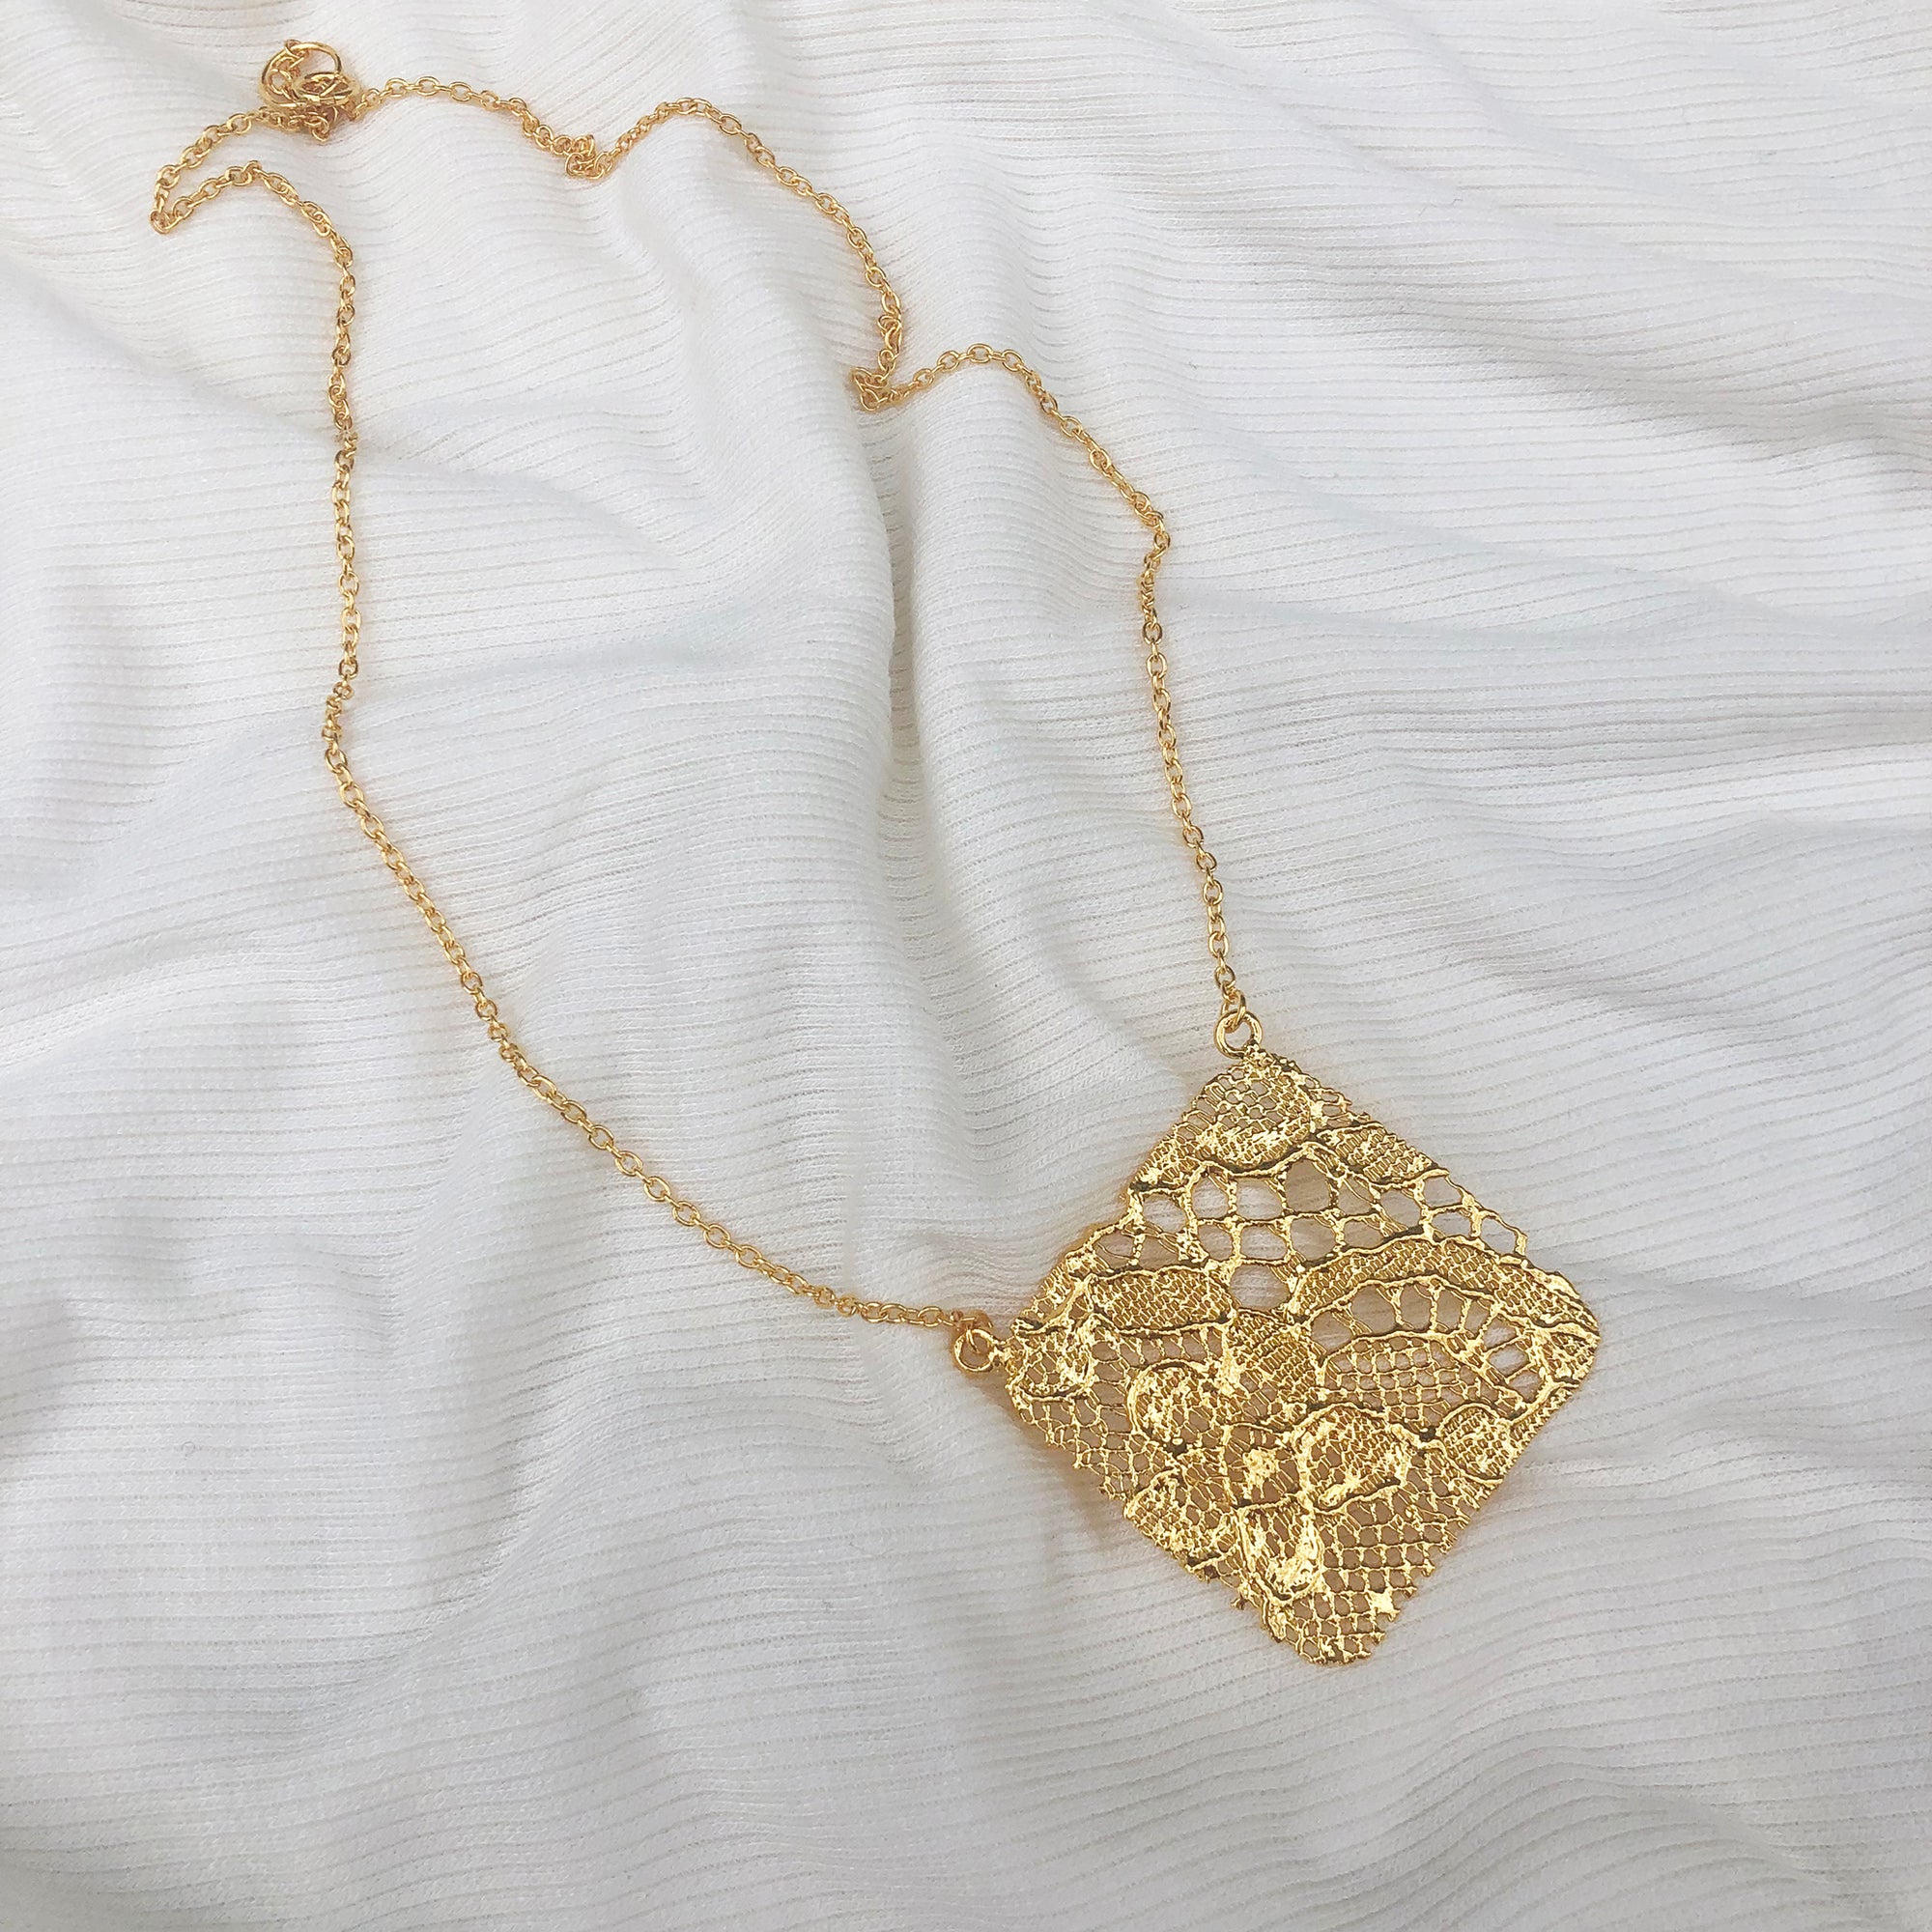 Intricate square pendant lace necklace in 24k gold.